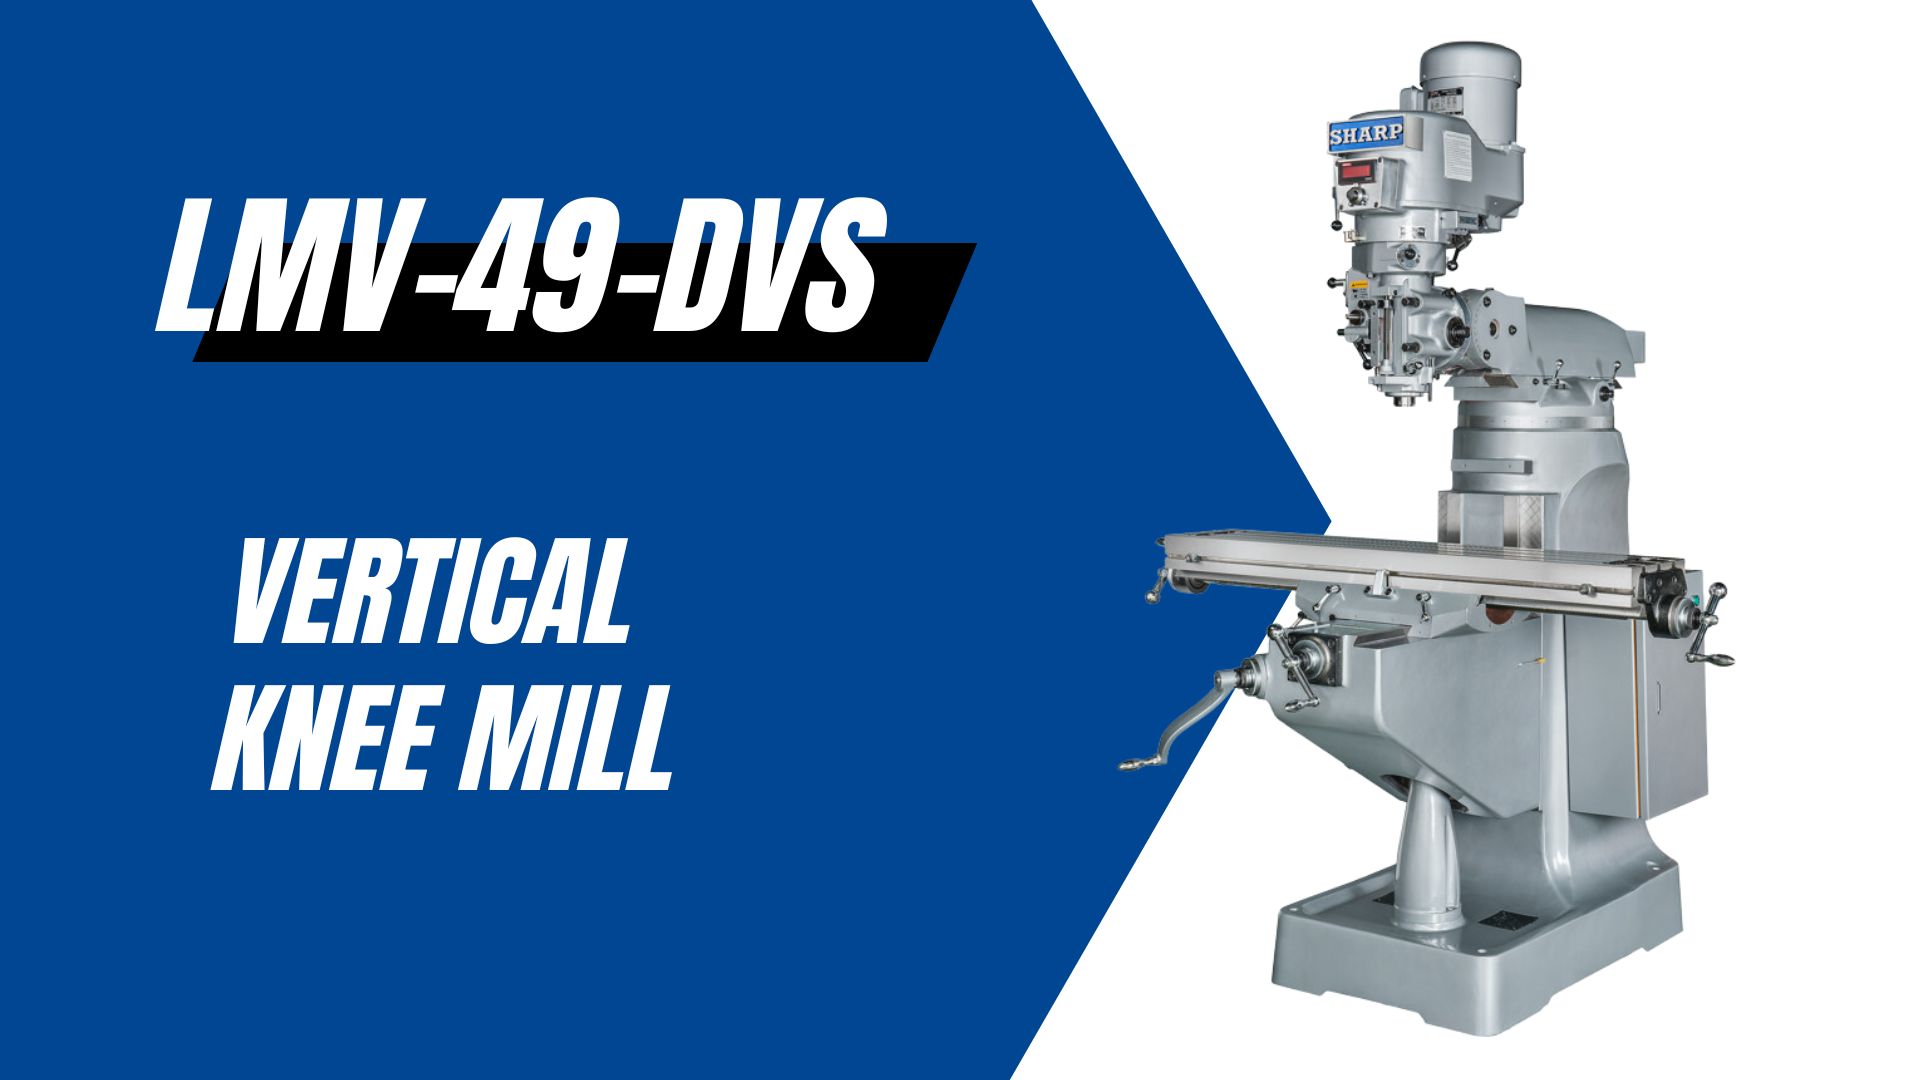 Sharp LMV-49-DVS, a Vertical Knee Mill for Morris Machine of the Month